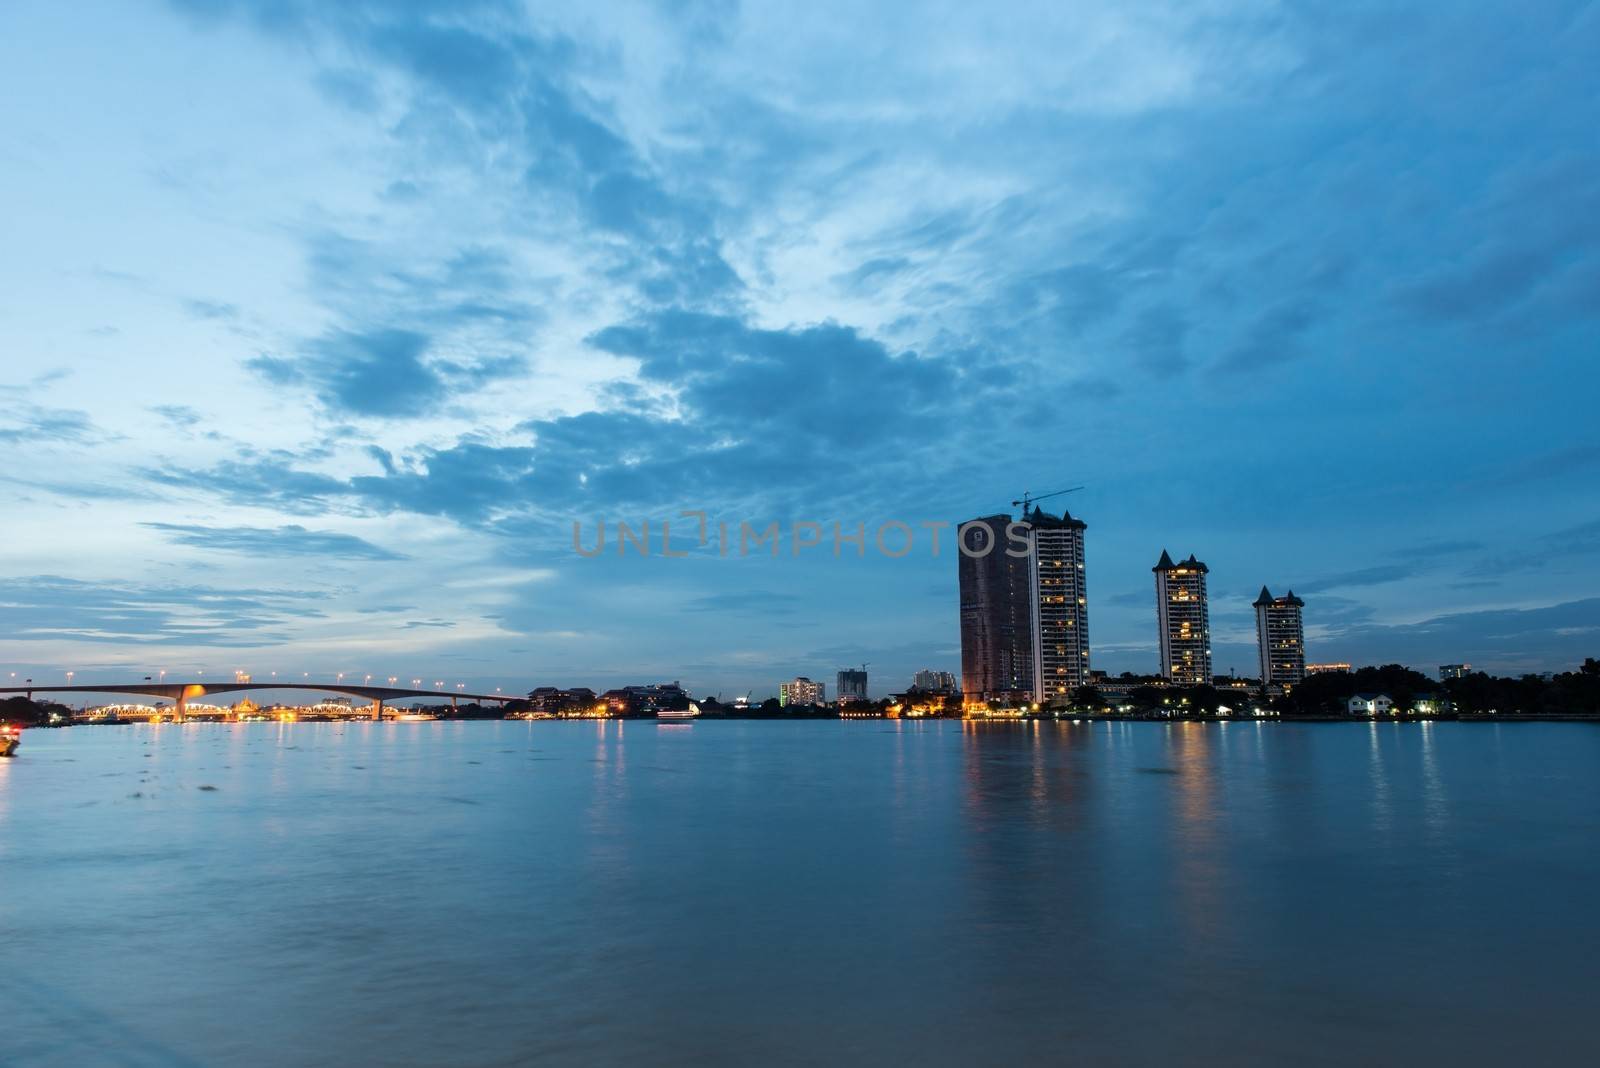 Bangkok city scape, taken at twilight by sasilsolutions